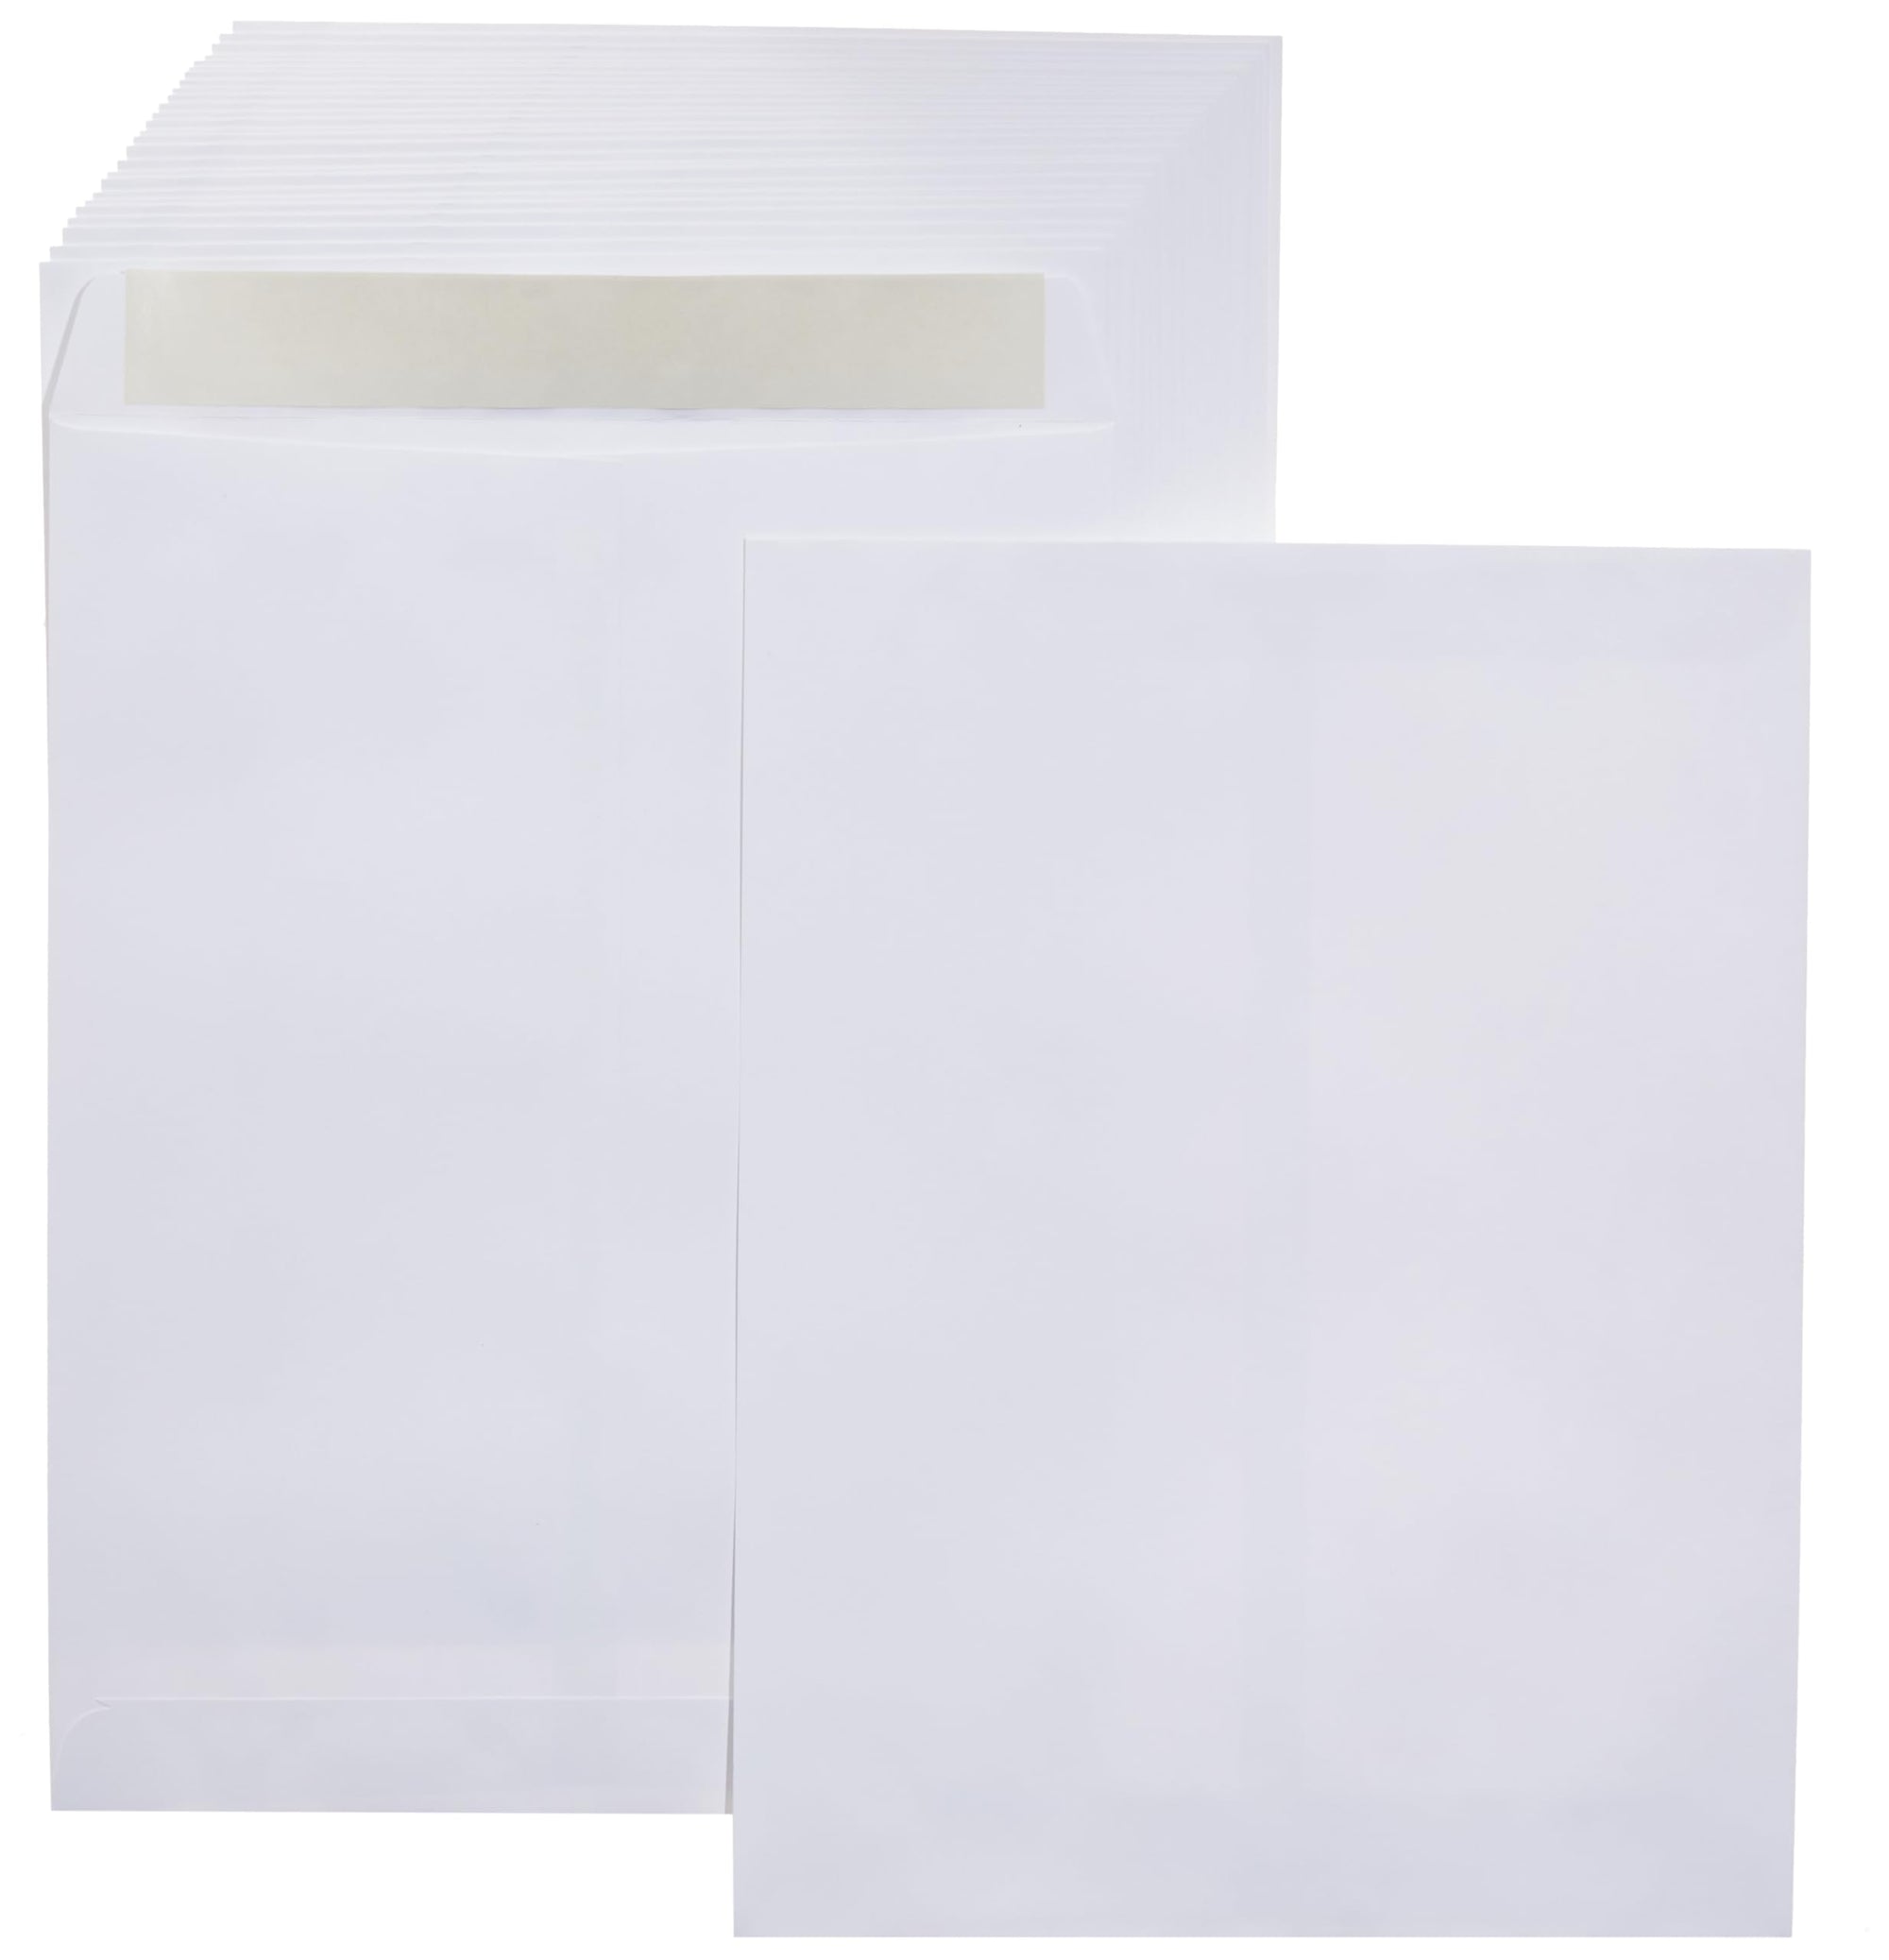 Basics Catalog Mailing Envelopes Peal and Seal White 10x13in 100pk